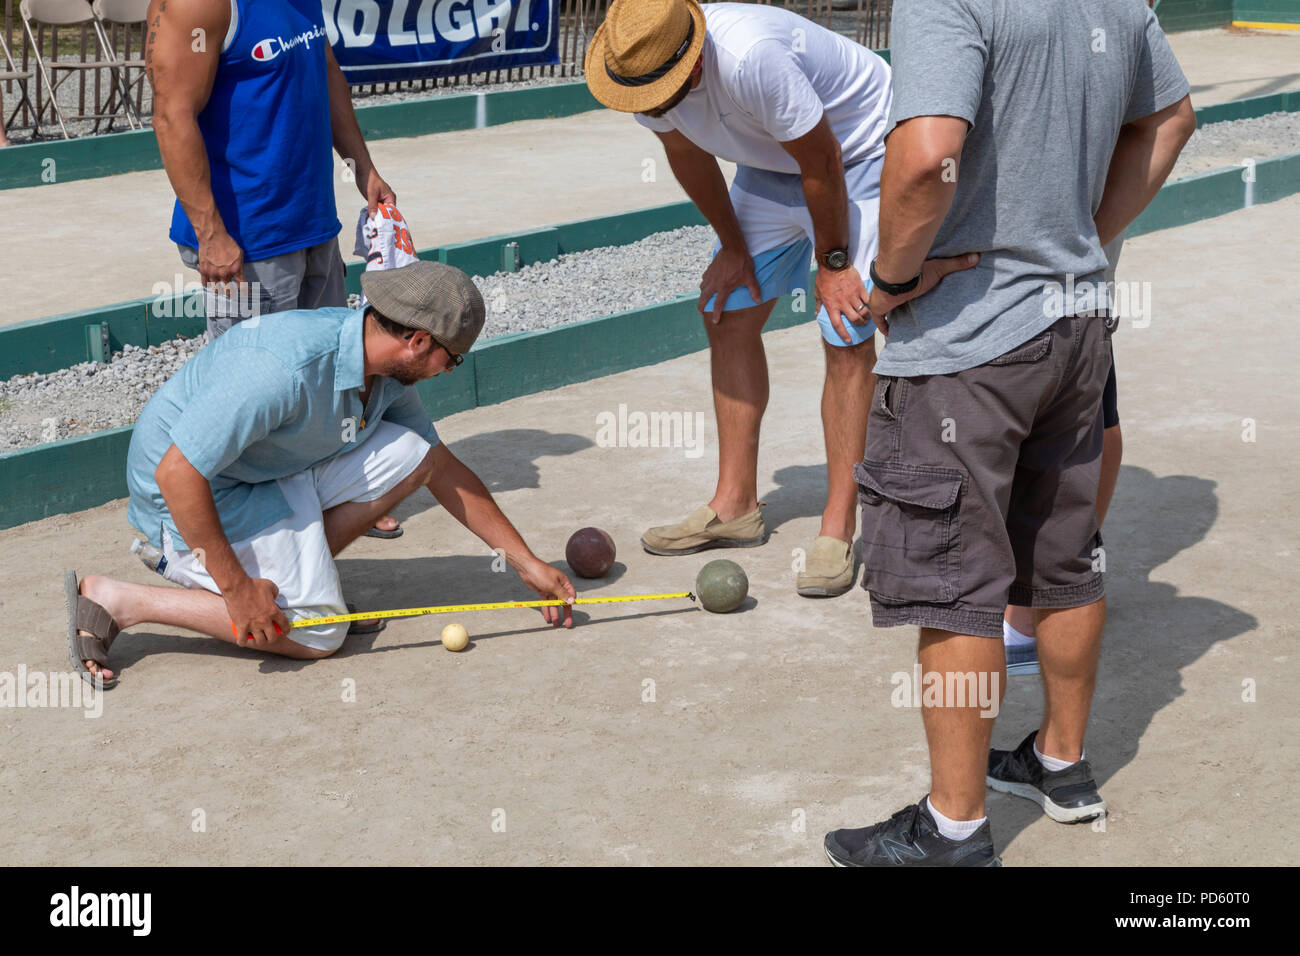 Dearborn, Michigan - Italian-American men play in a bocce tournament during the annual Dearborn homecoming festival. Stock Photo